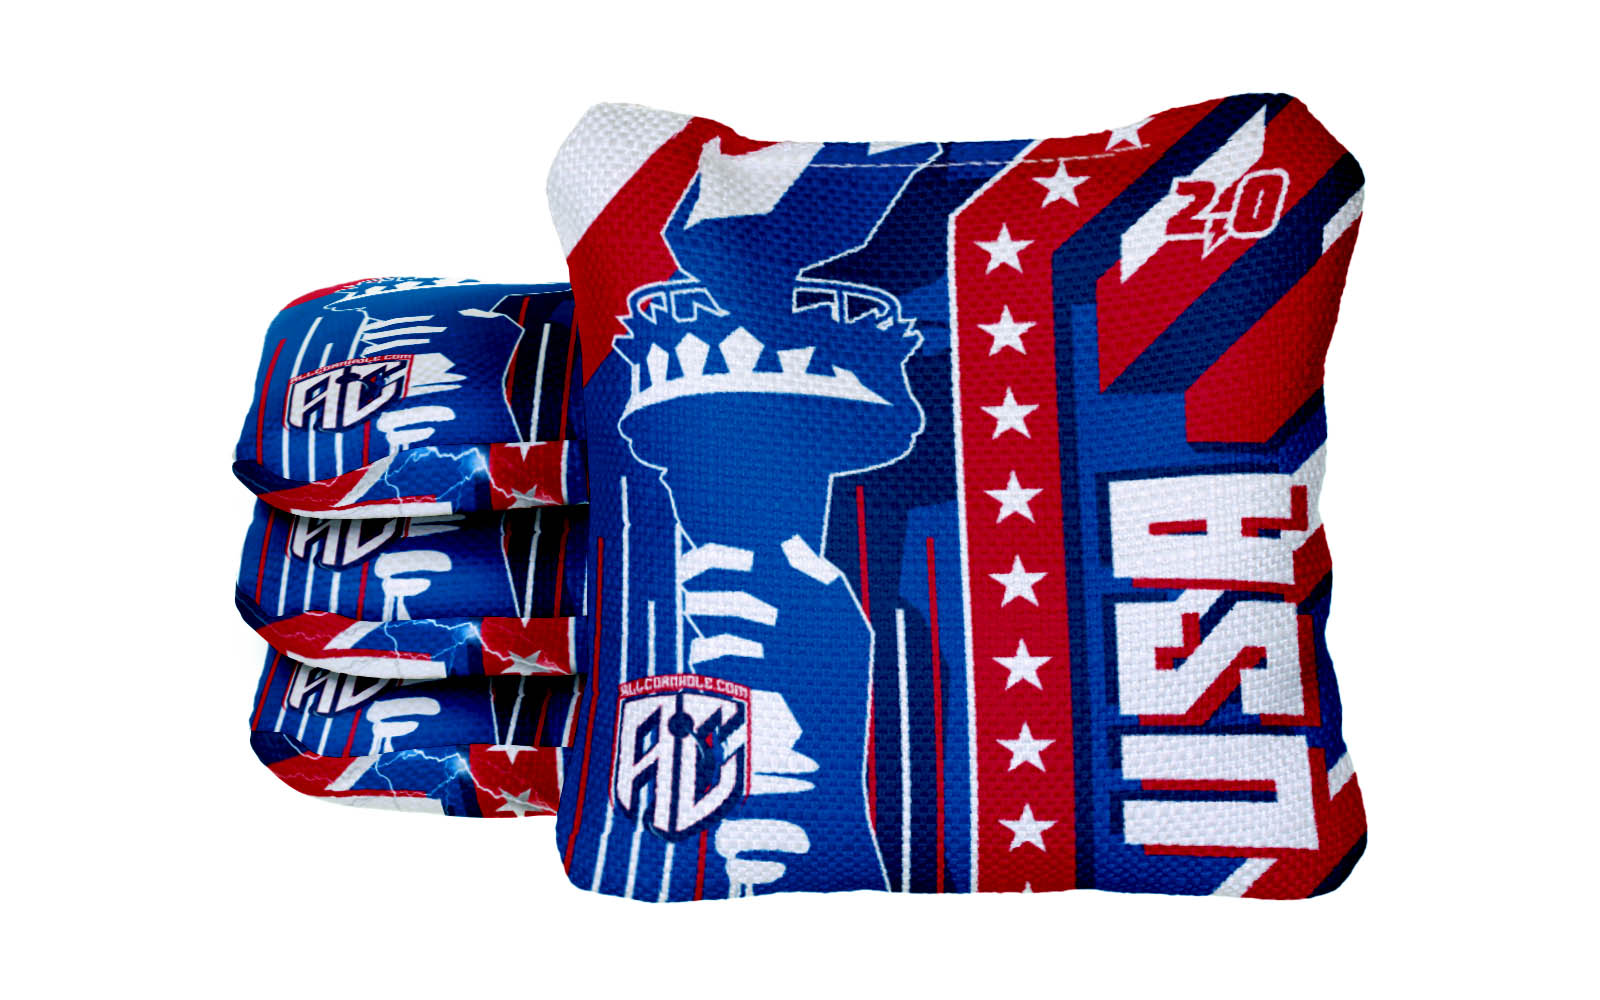 All-Slide 2.0 cornhole bags - 4TH OF JULY TORCH DESIGN - SET OF 4